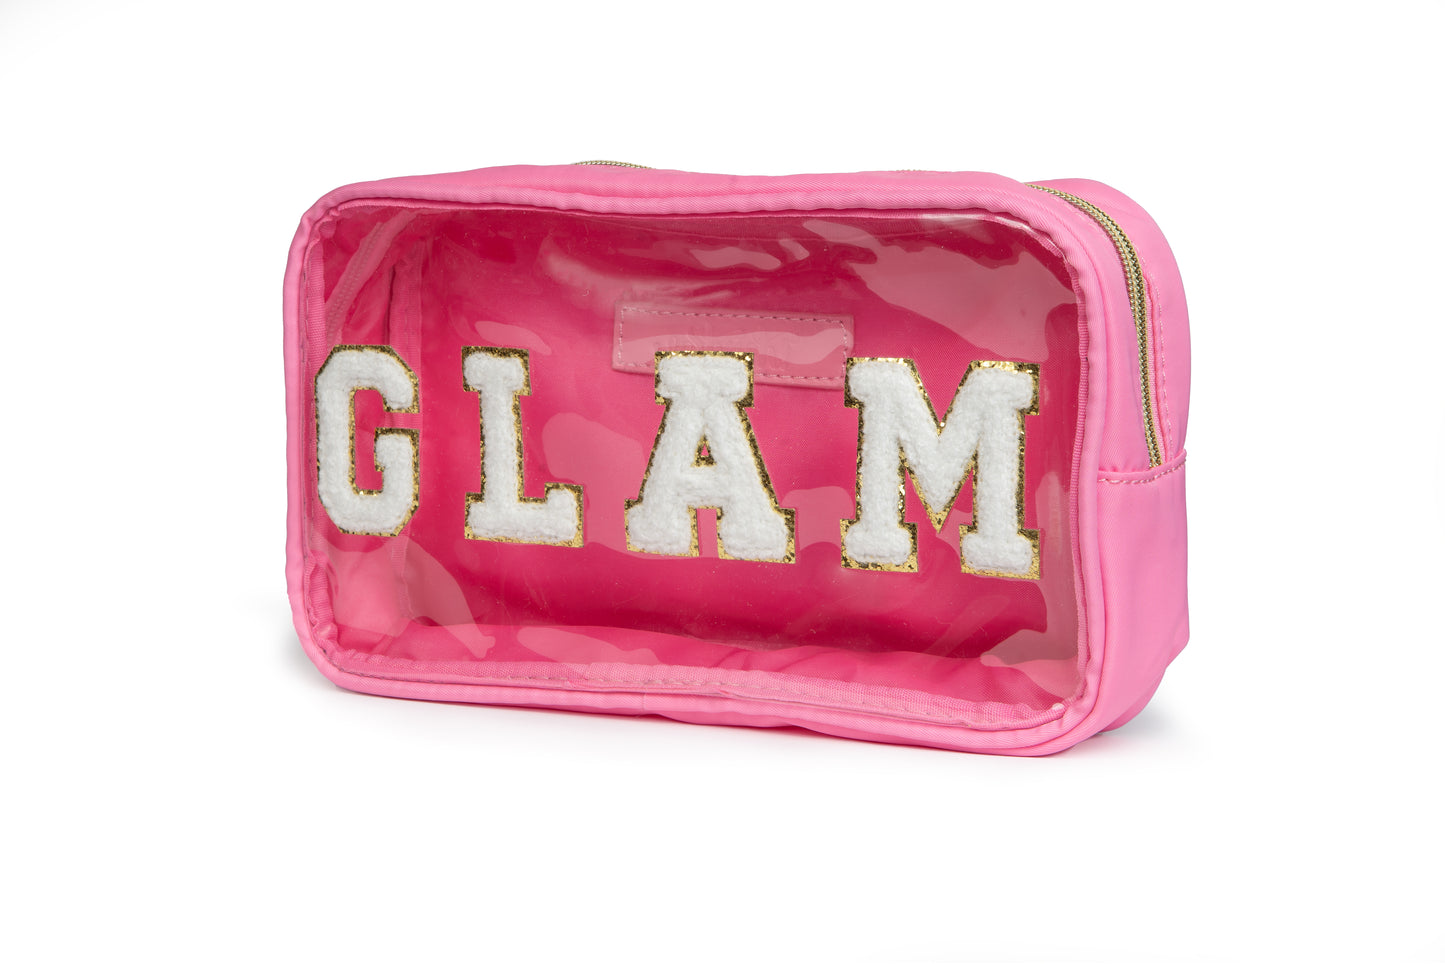 Glam Pouch in Pink